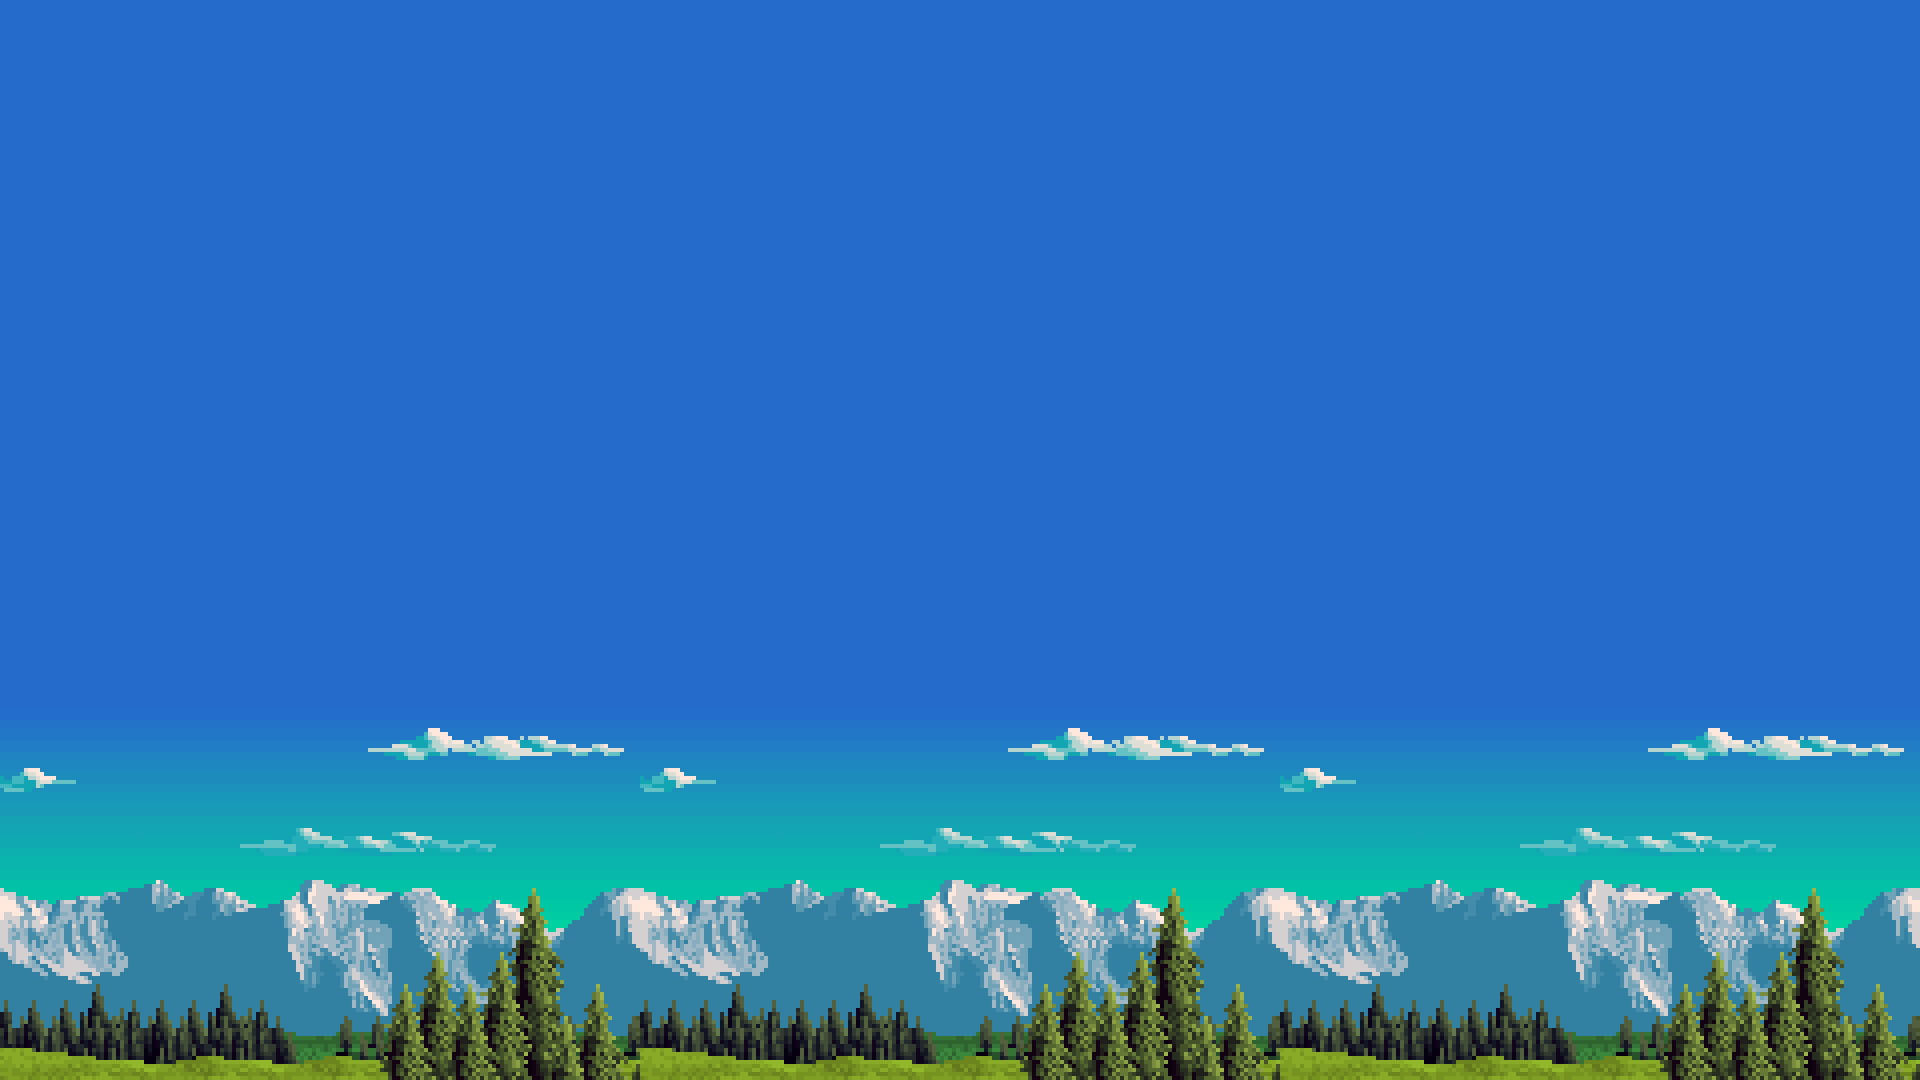 Wallpaper Mountains And Trees Painting, Pixel Art, 8 Bit